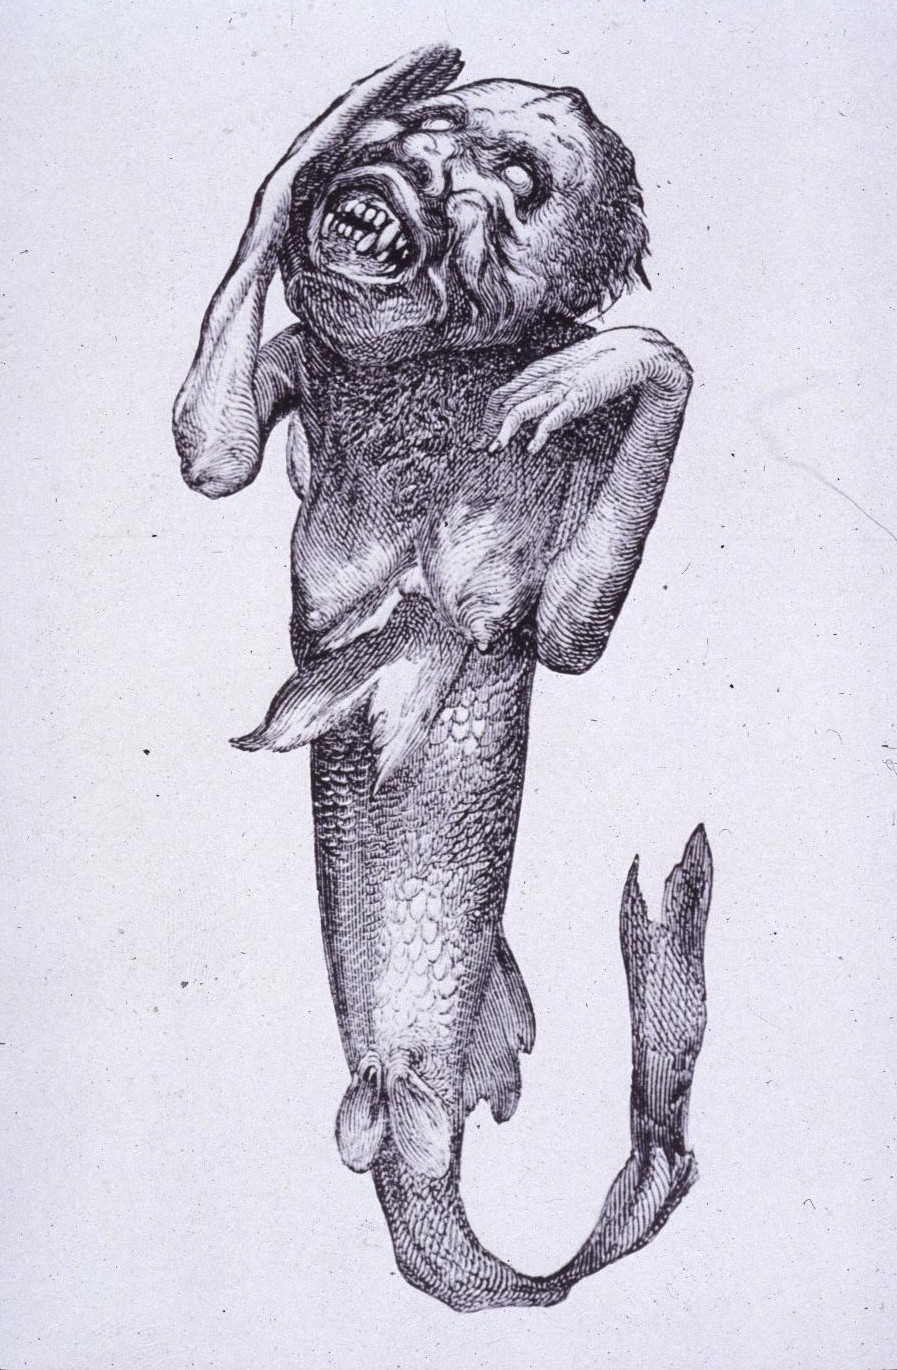 The Feejee Mermaid was exhibited in 1842. By P. T. Barnum (P. T. Barnum) [Public domain], via Wikimedia Commons